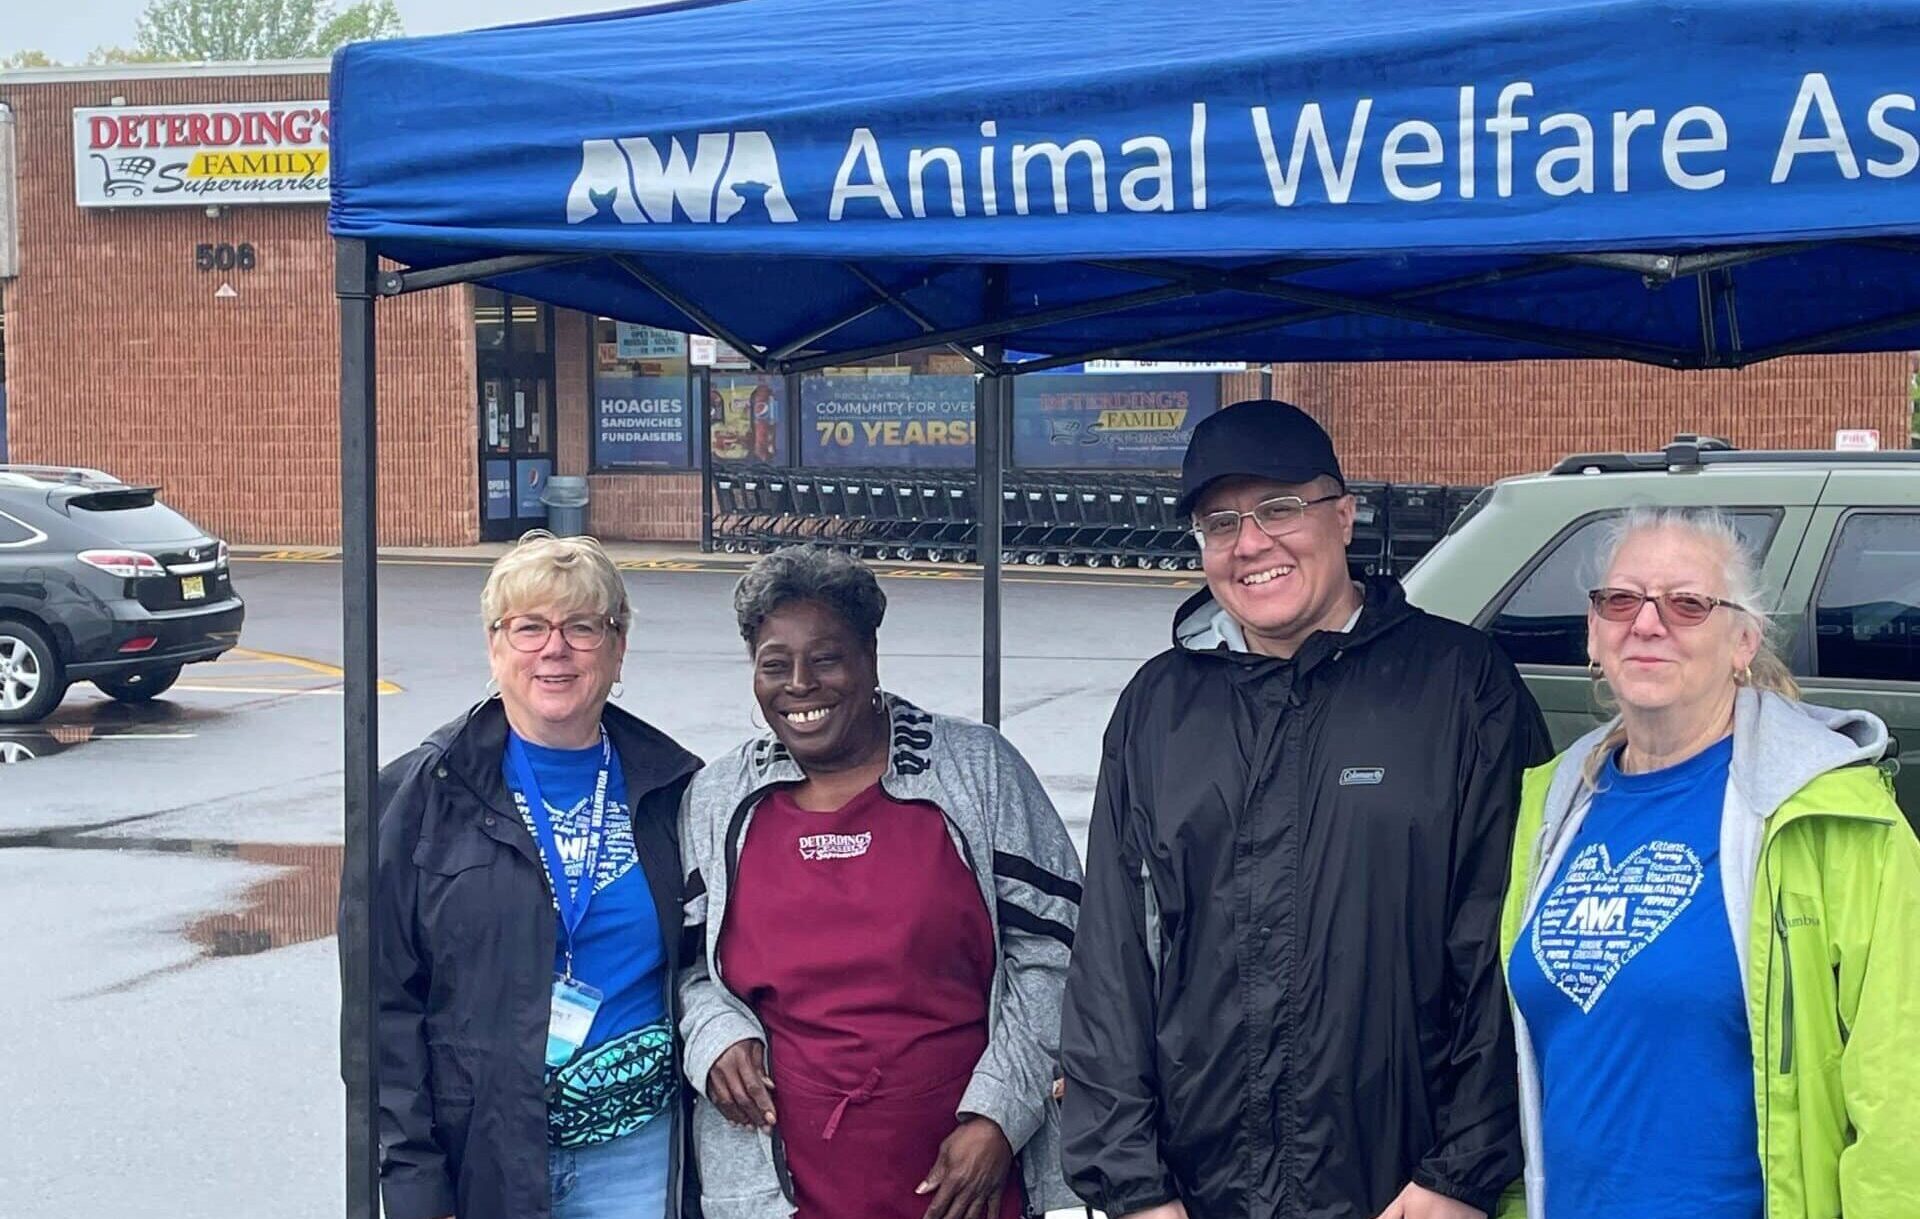 Three volunteers and employee outside for Animal Welfare Association outreach event at Deterding's grocery store.